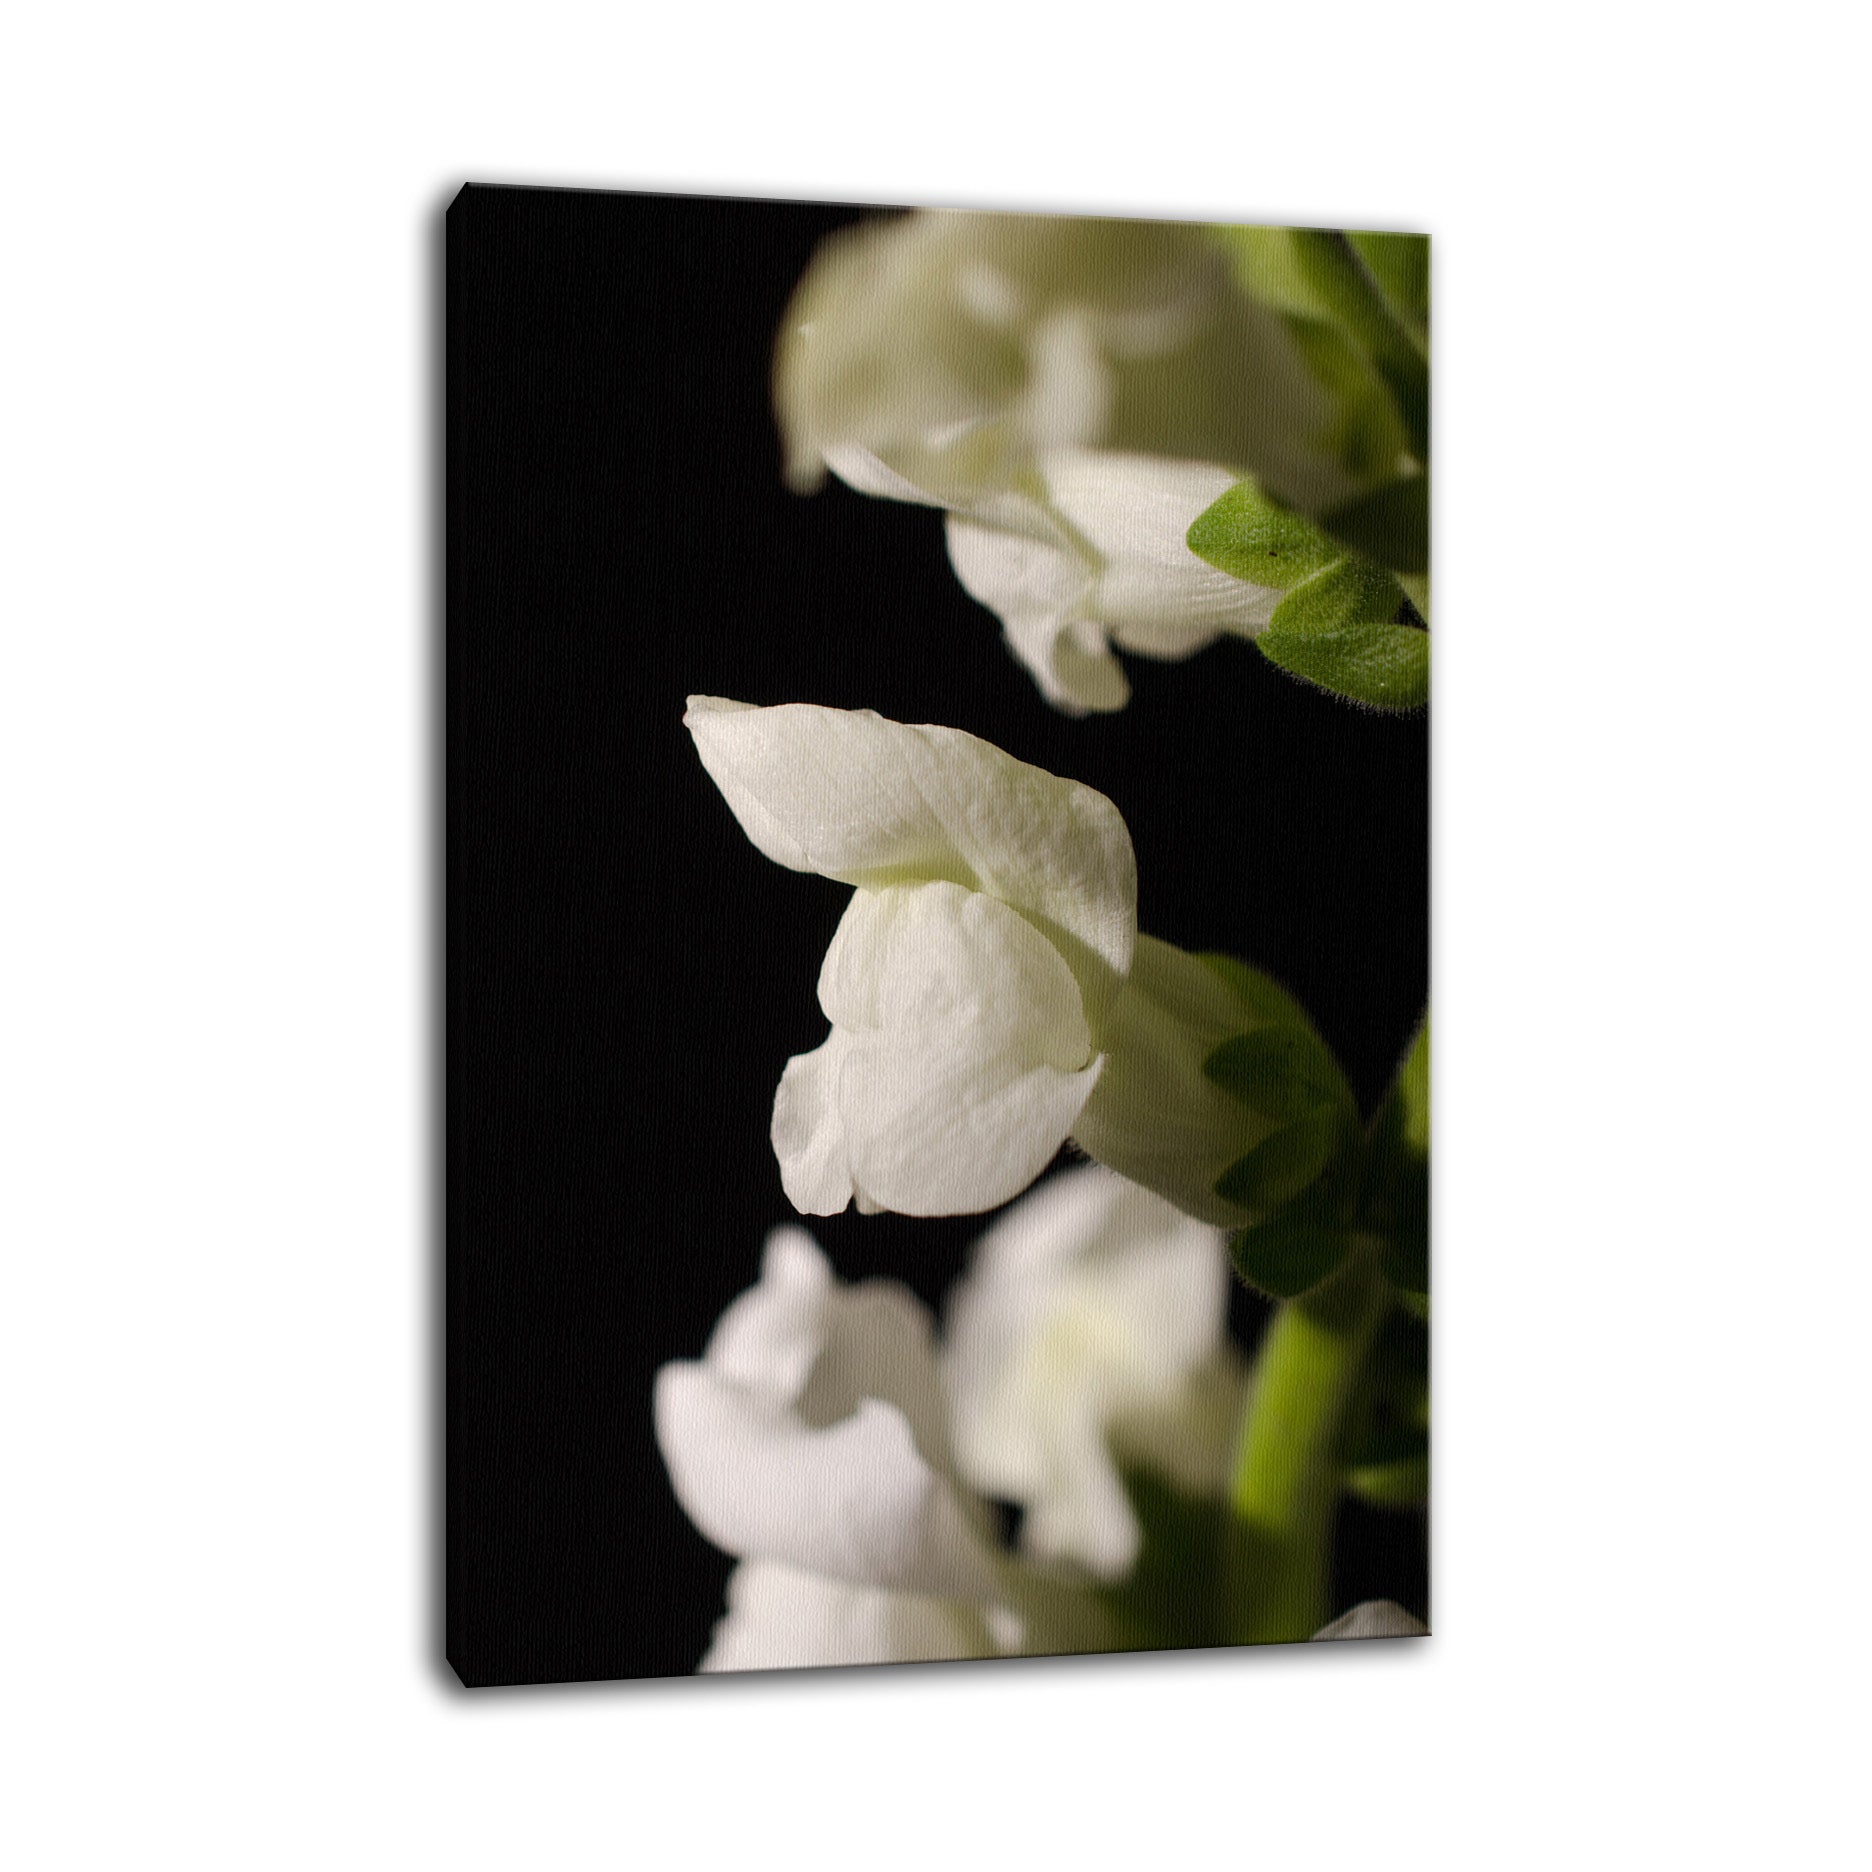 Single Snapdragon Bloom Against Black Nature / Floral Photo Fine Art Canvas Wall Art Prints  - PIPAFINEART